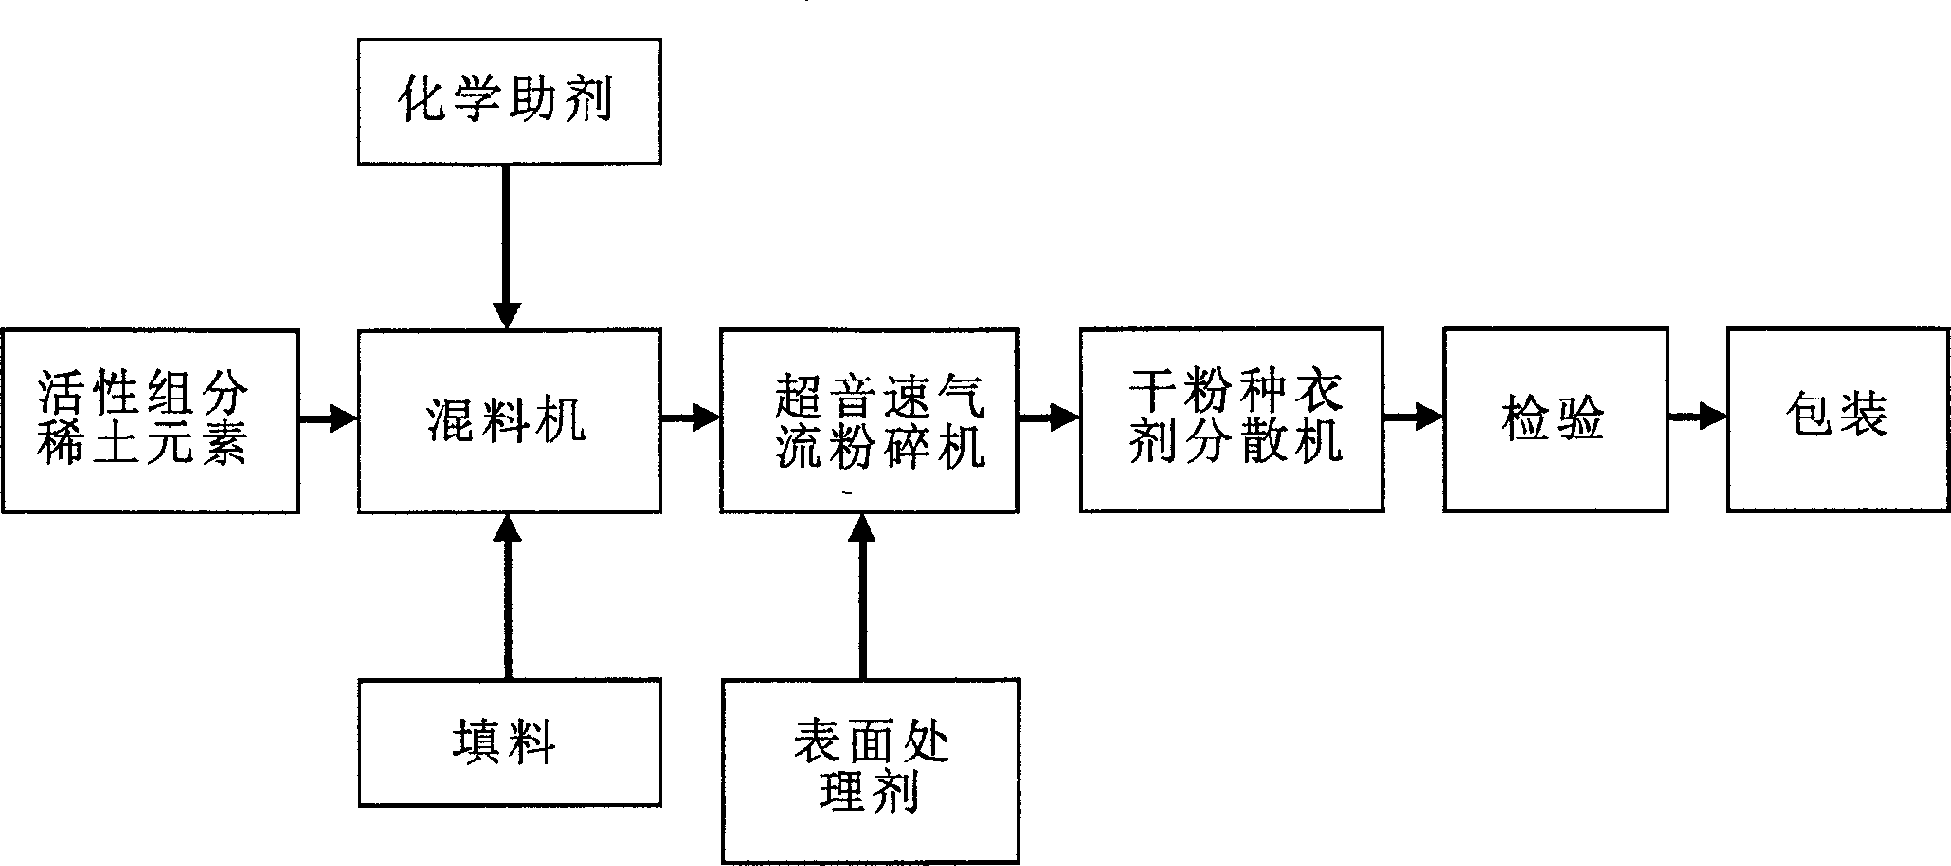 Method for producing rare-earth dry powder seed coating agent